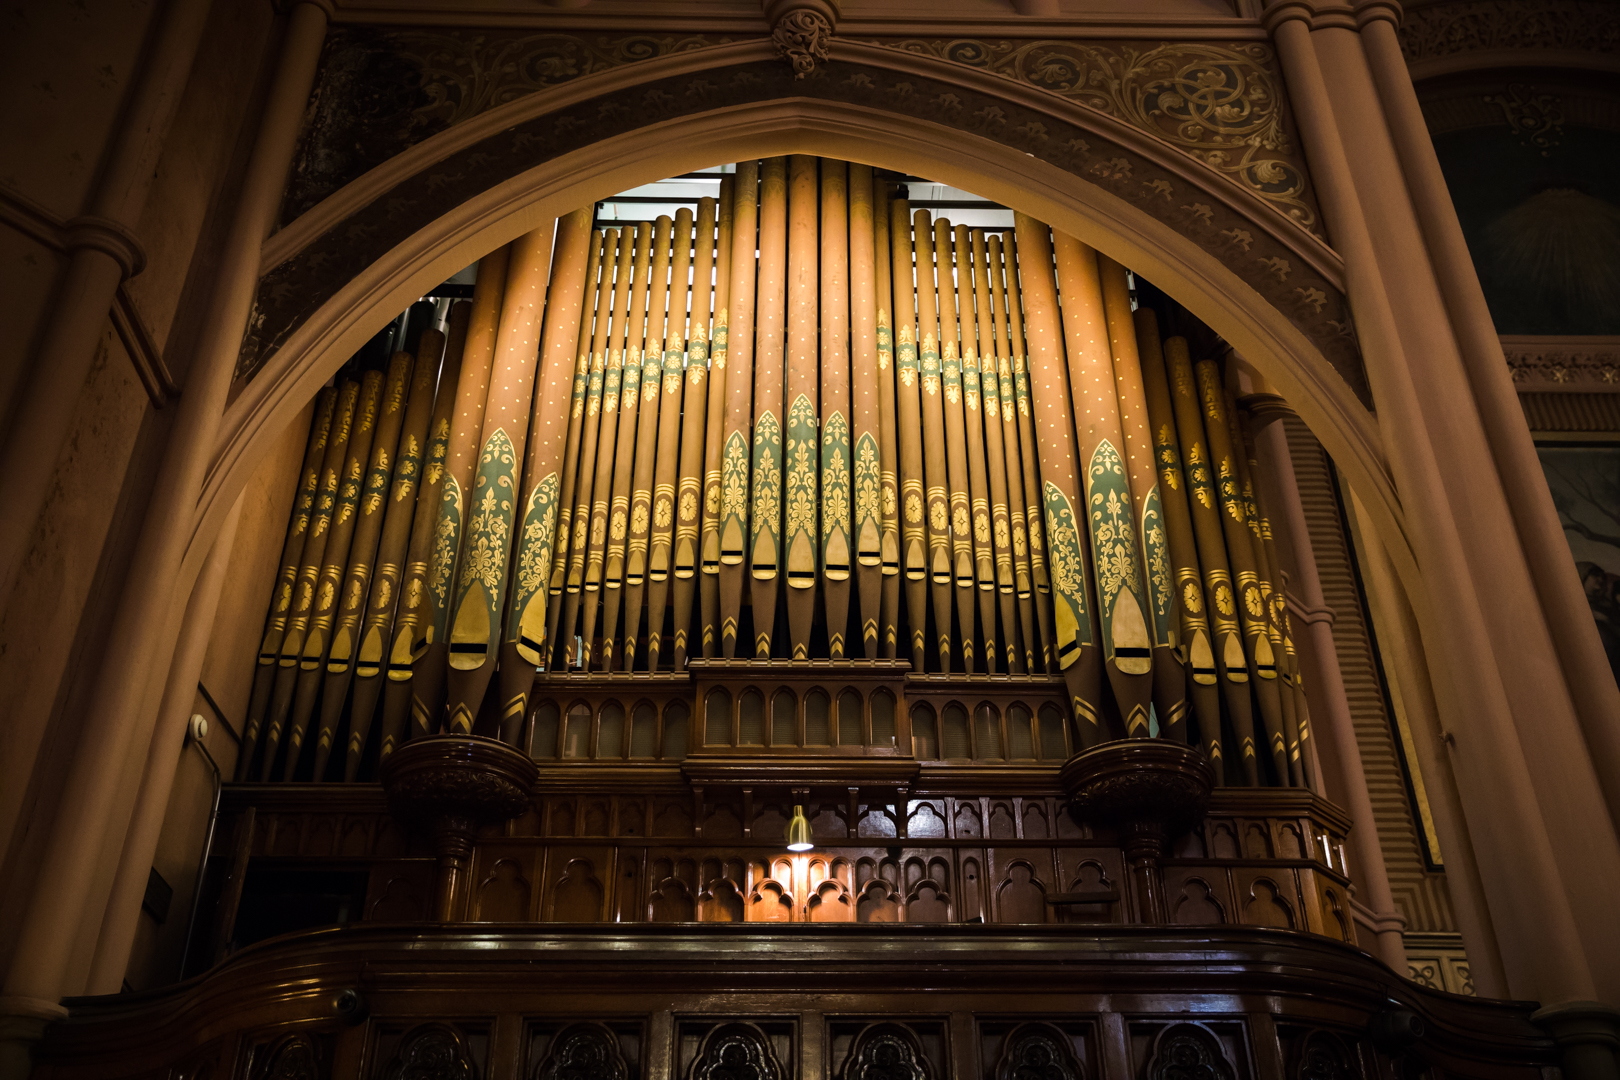 In 1928, the M.P. Moller Company rebuilt the 1891 Roosevelt organ and more work was done on it in 1937. Eagle photo by Paul Frangipane